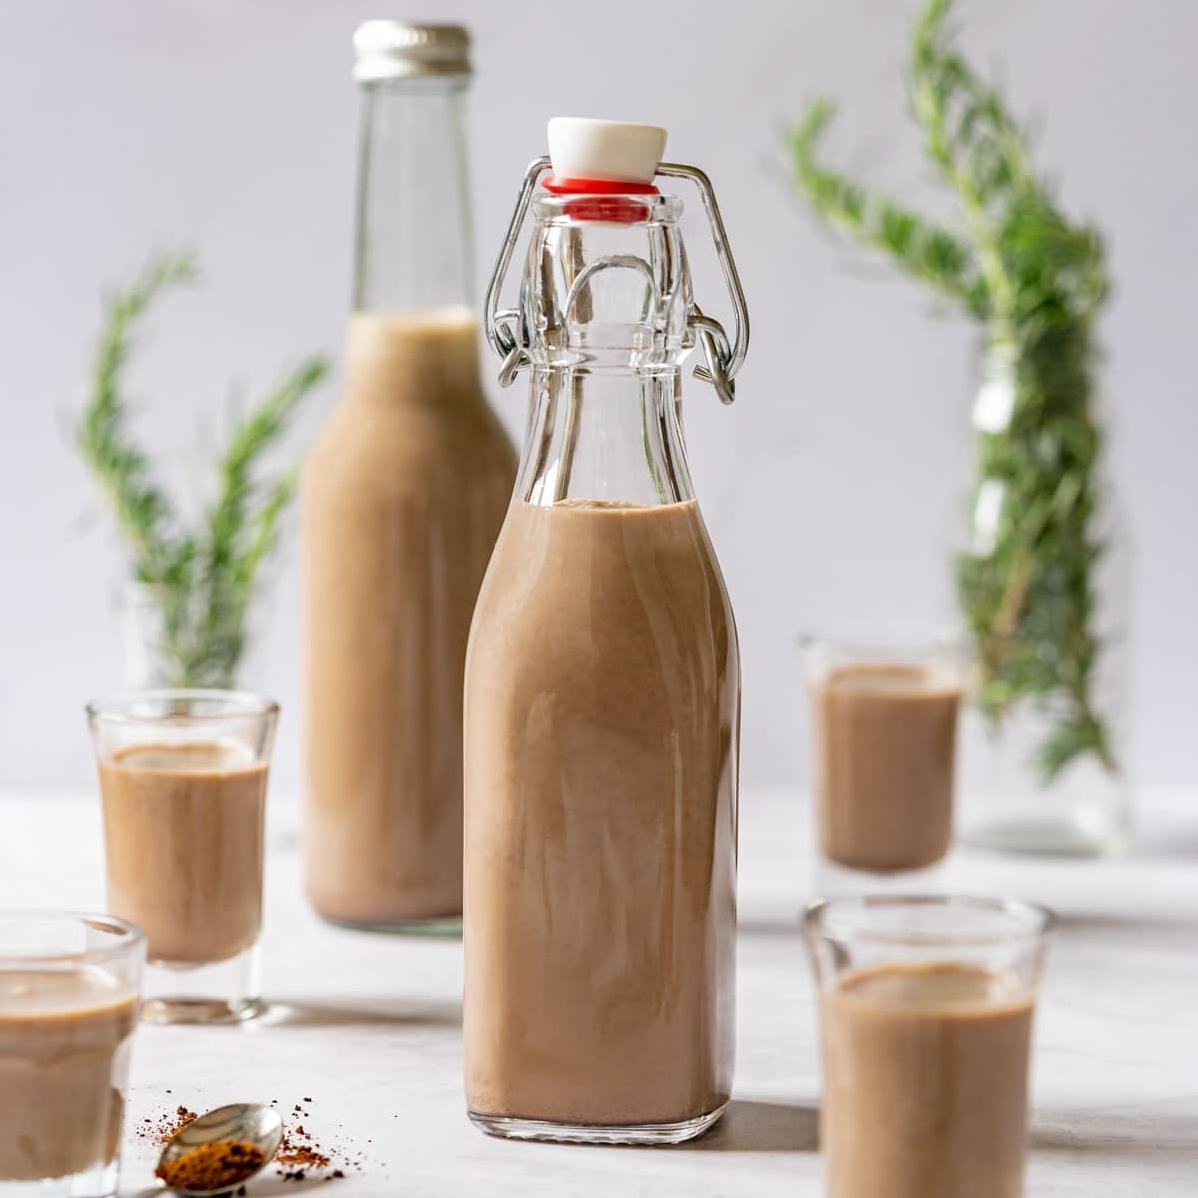  Indulge in this creamy and decadent homemade Irish Cream, perfect for any occasion.